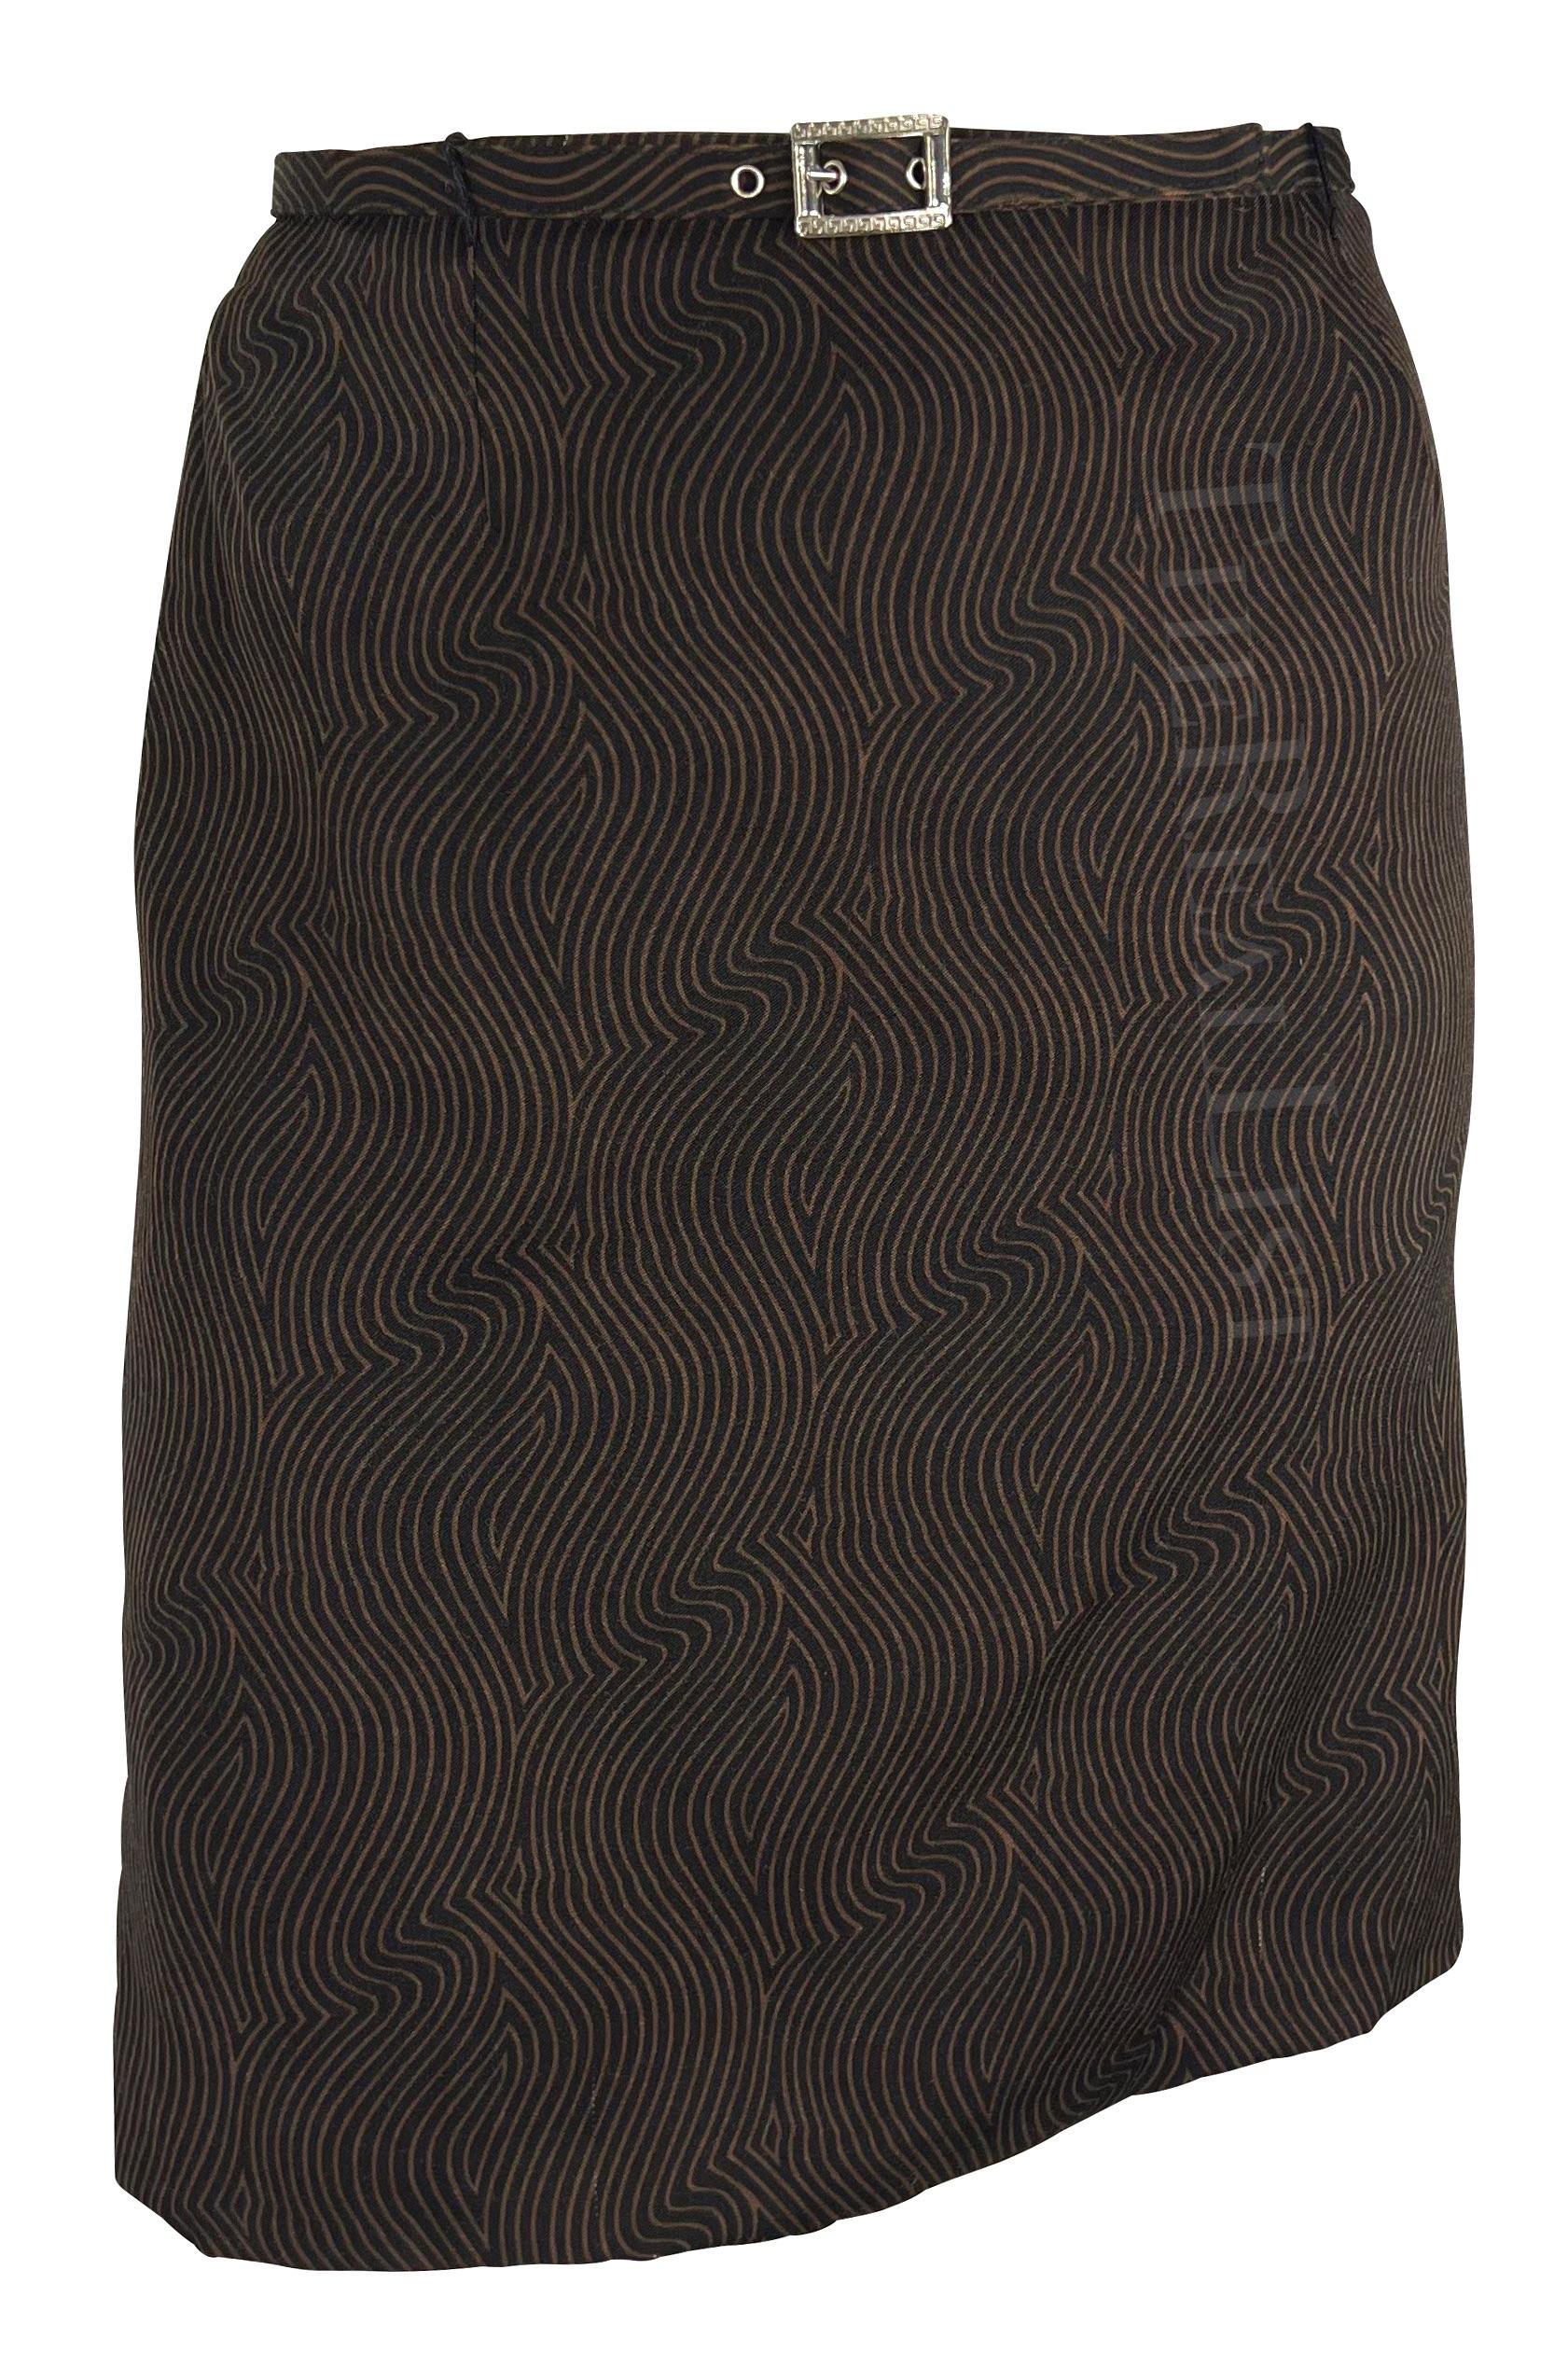 Presenting a fabulous brown Gianni Versace skirt suit, designed by Gianni Versace. From the Fall/Winter 1996 collection, the jacket and matching skirt are adorned in a captivating wavy linear print. The jacket, accentuated by a fold-over collar and